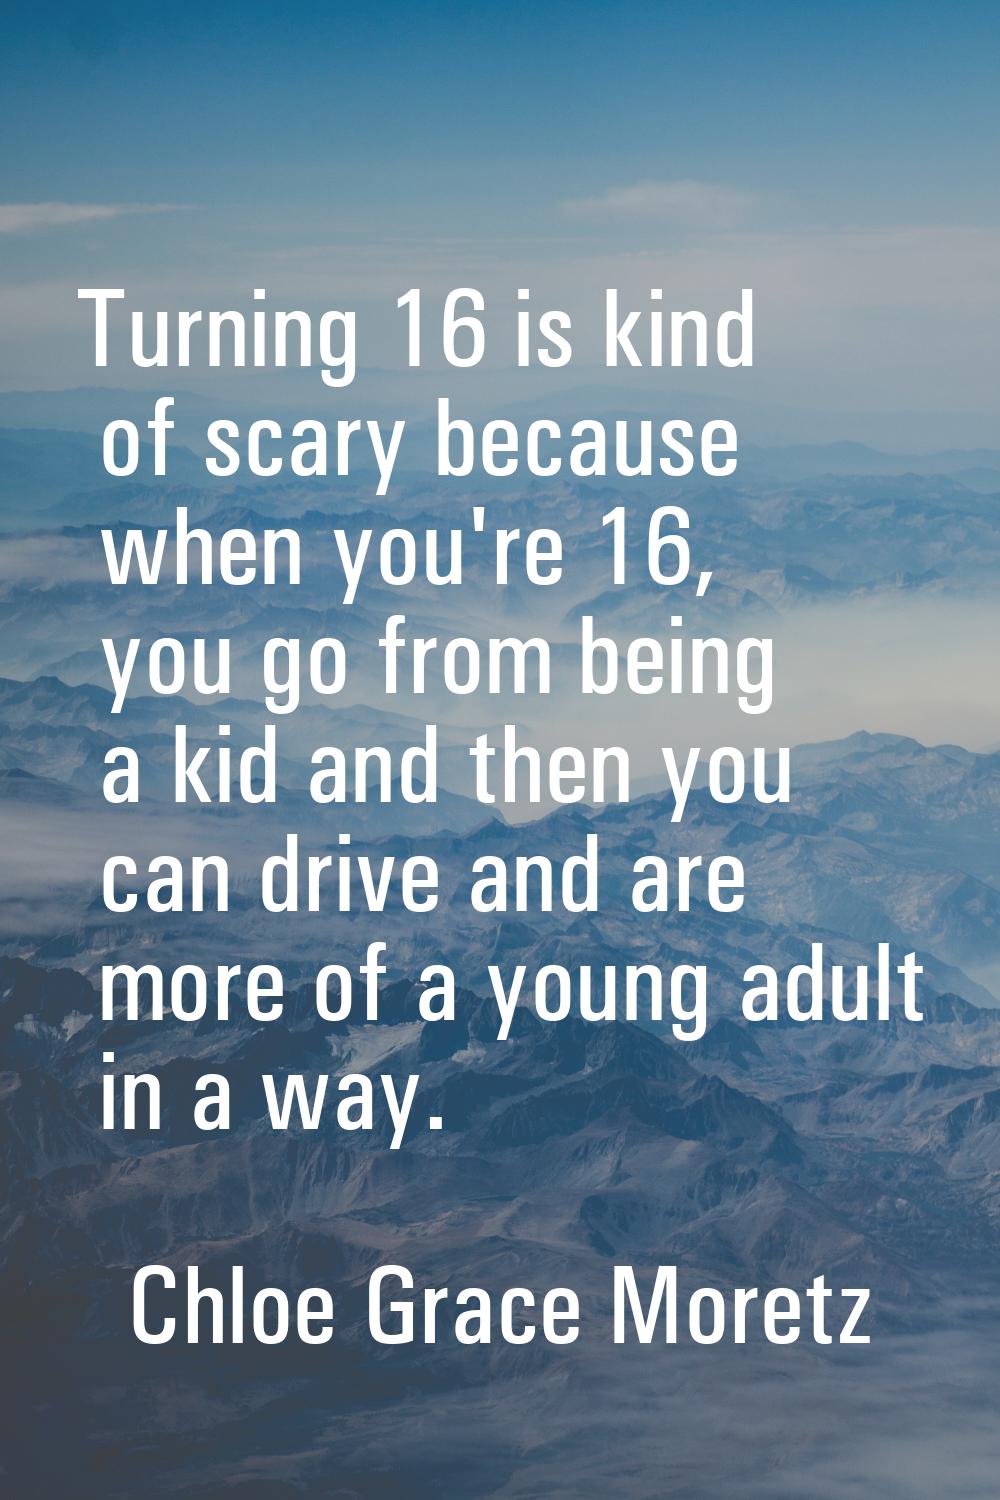 Turning 16 is kind of scary because when you're 16, you go from being a kid and then you can drive 